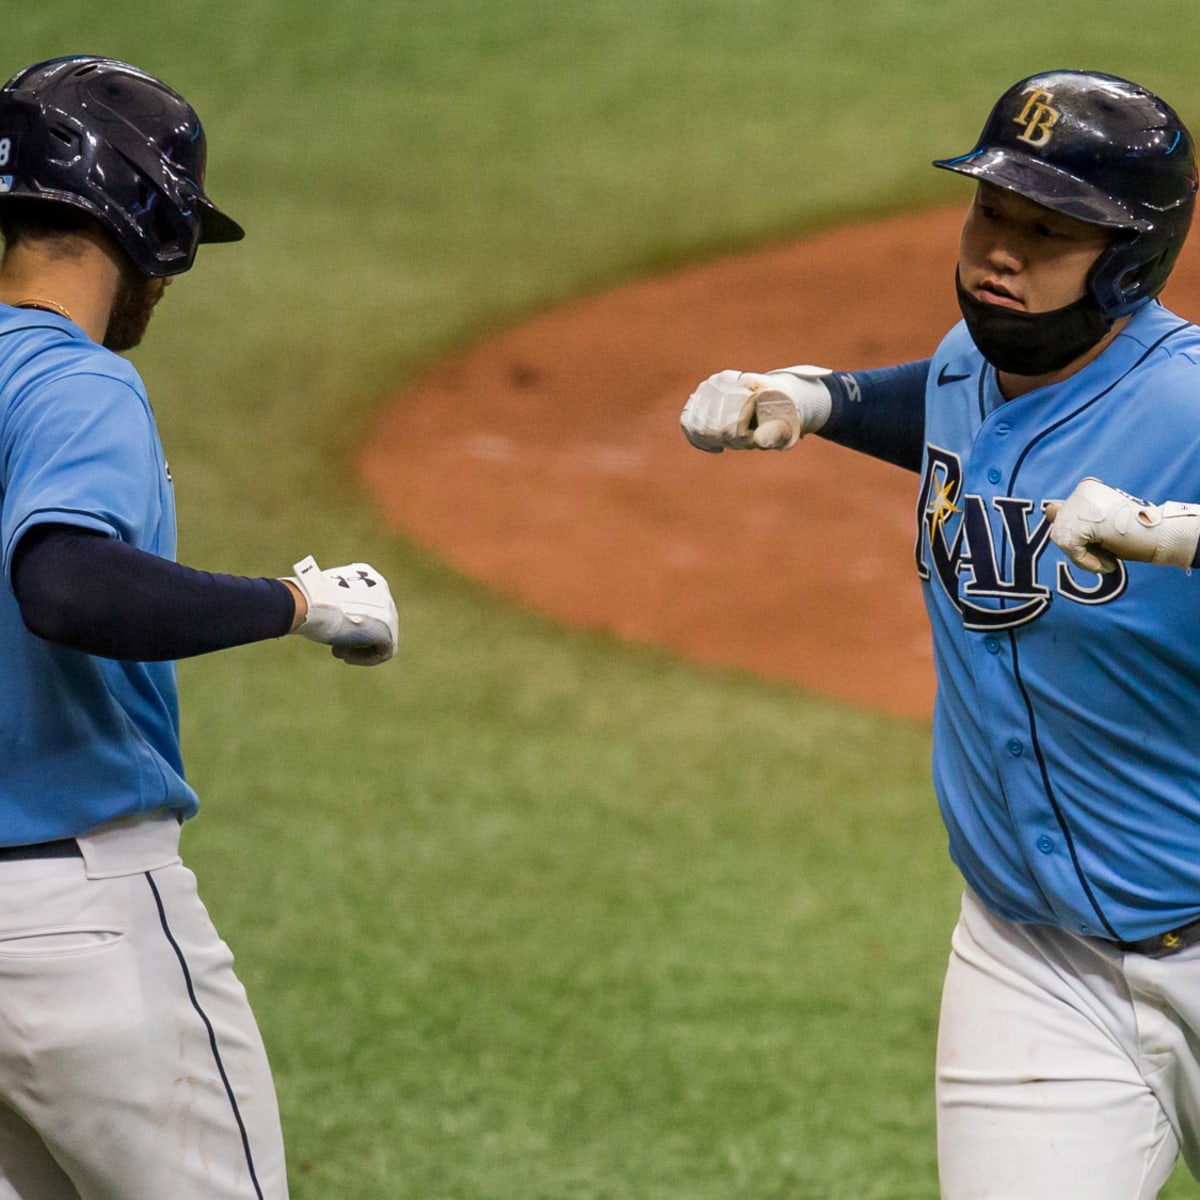 Rays' Ji-Man Choi hits home run batting righthanded for first time - Sports  Illustrated